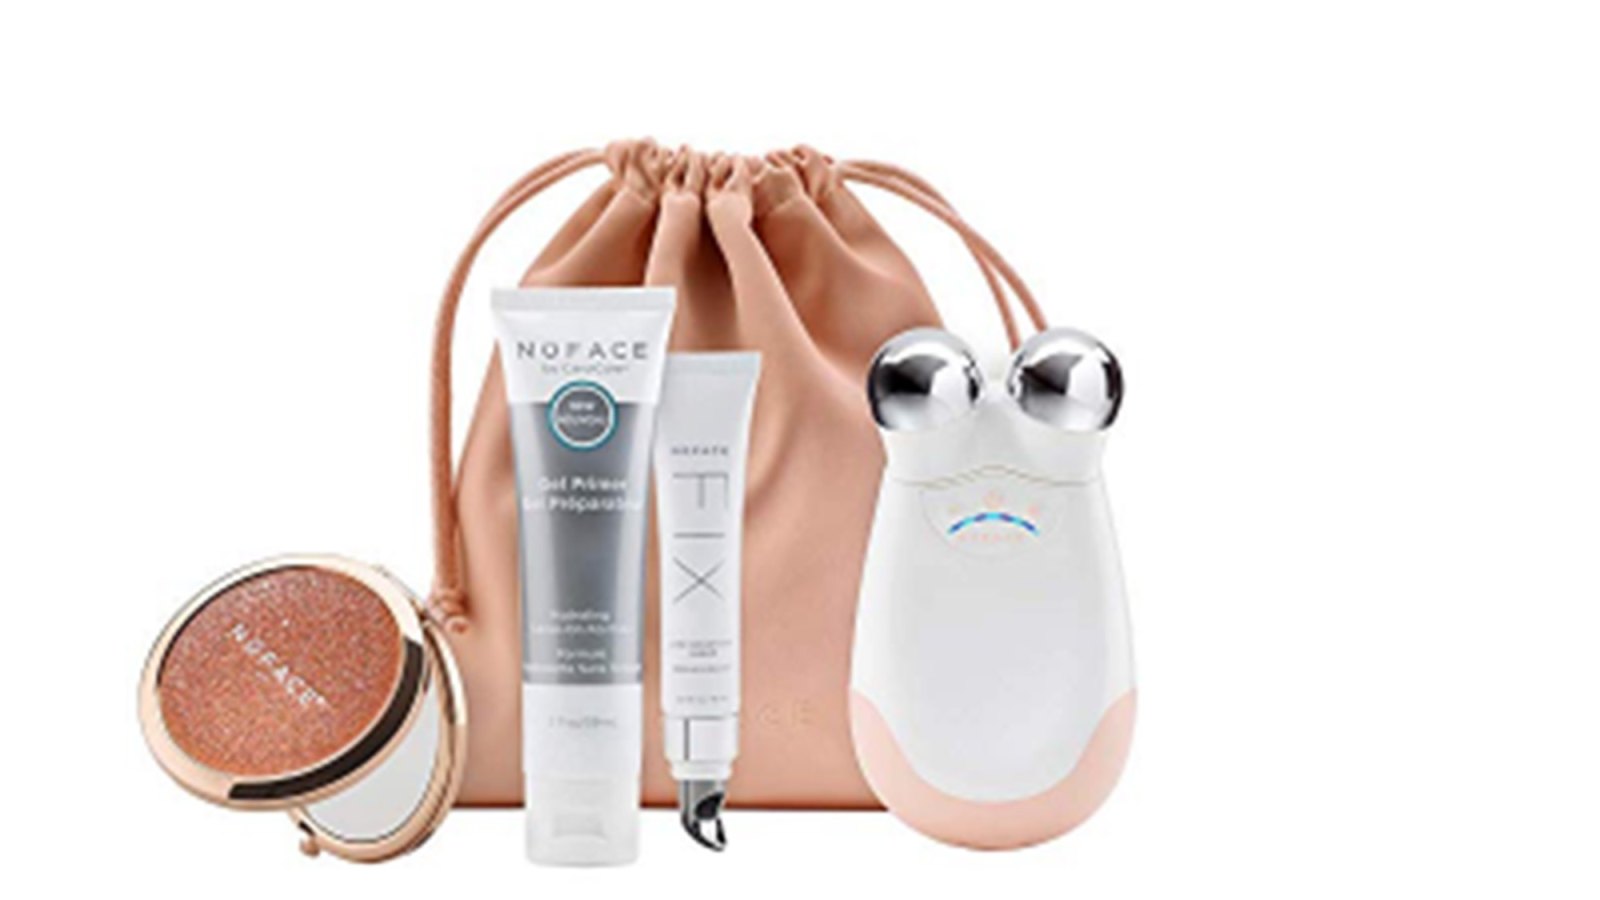 NuFACE Advanced Facial Toning Kit, Shimmer All Night Collection